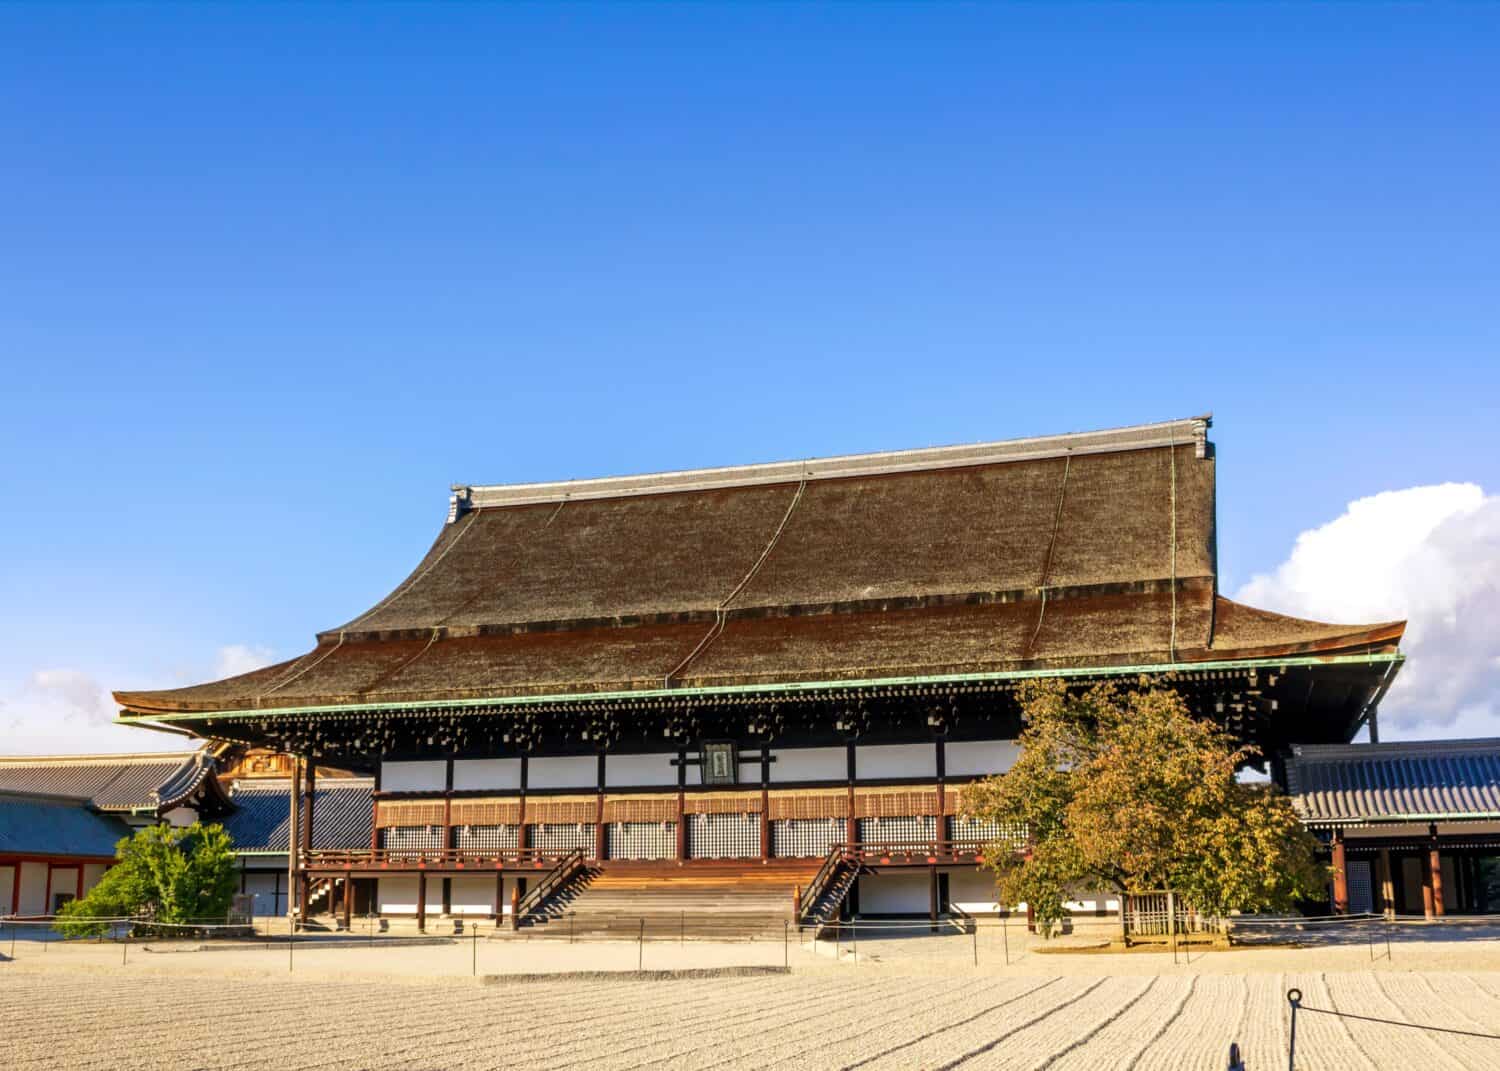 Shishinden, or The Hall for State Ceremonies, located within the Kyoto Imperial Palace in Kyoto, Japan. Translation of the sign 紫宸殿 - Shishinden Hall (Ceremonial Palace).